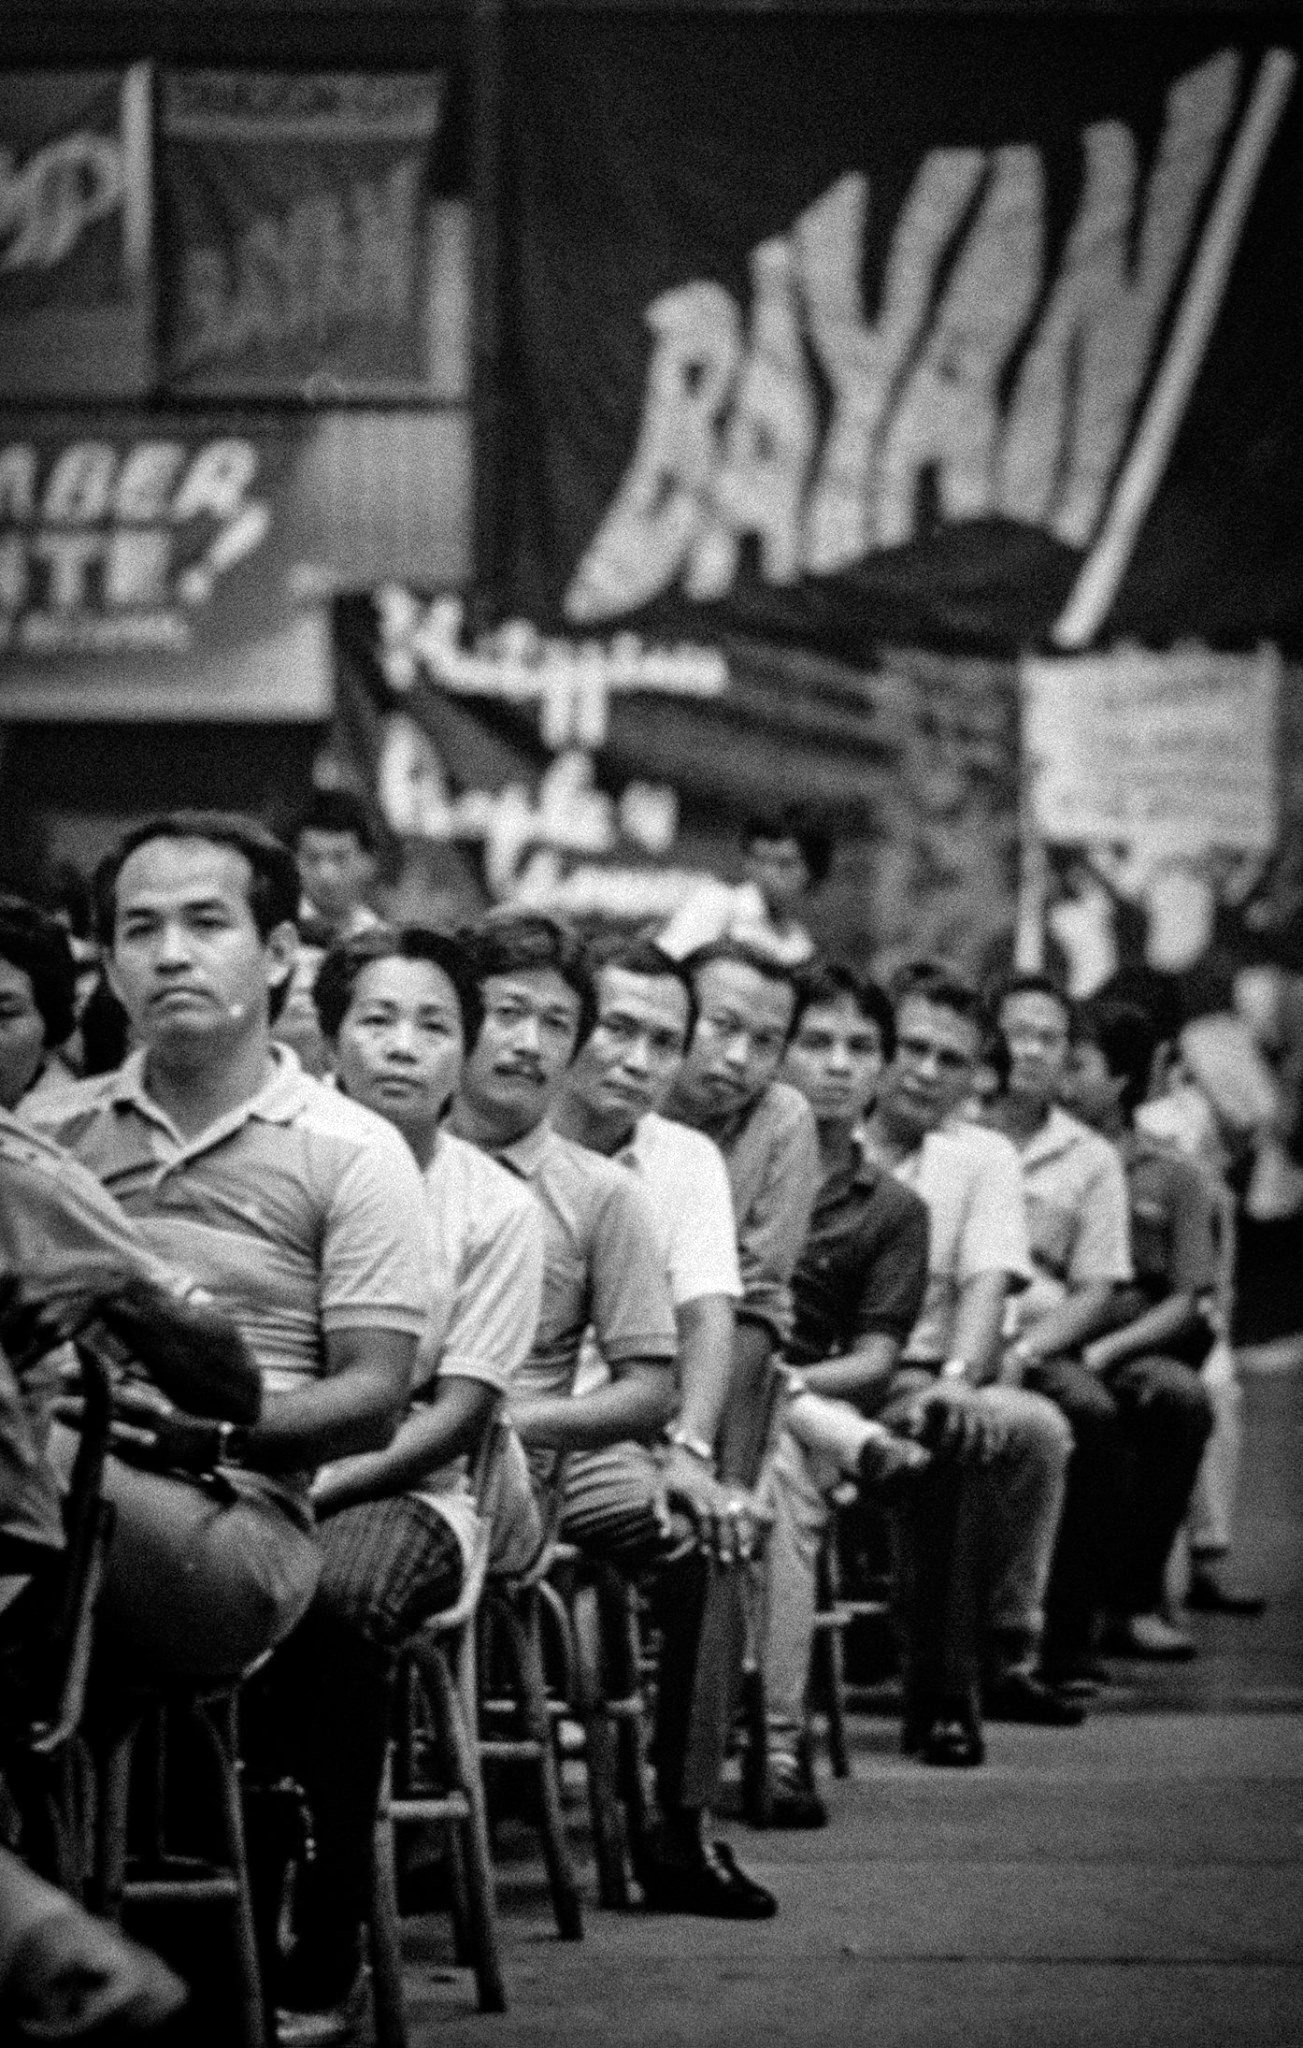 photo essay about martial law